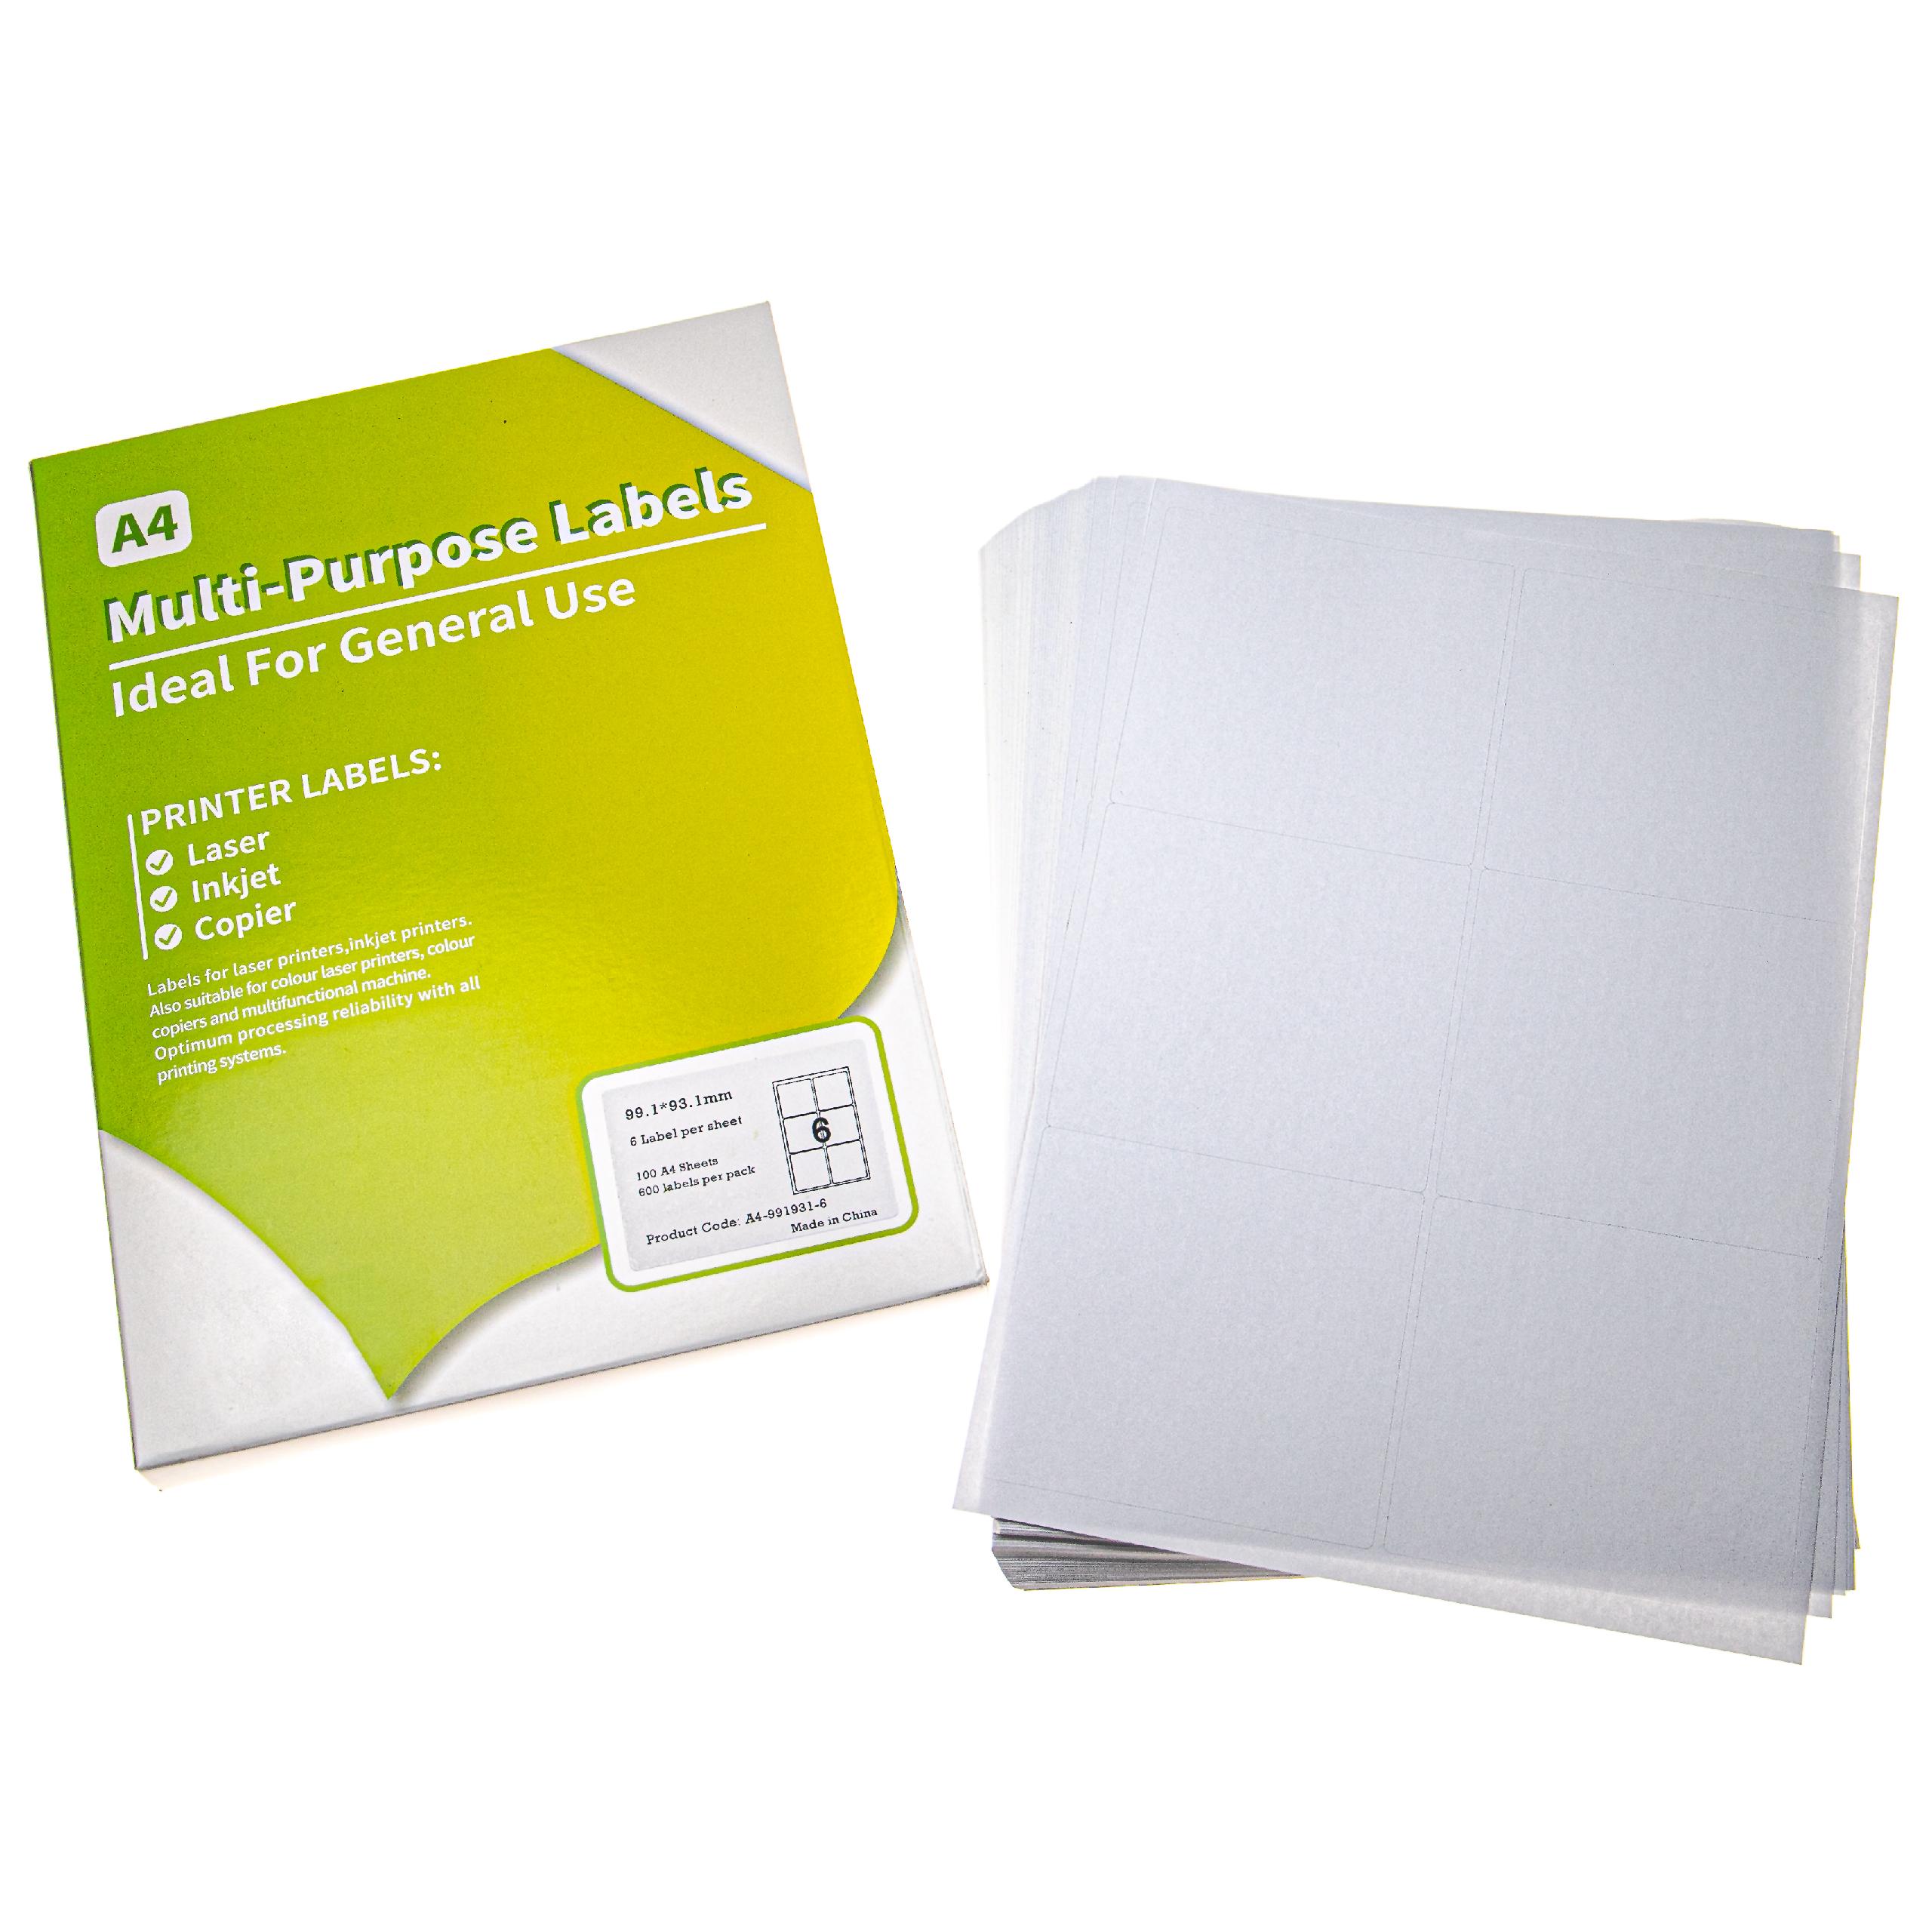 vhbw 100x Sheet with 6x Label per Side for Self-Printing with Inkjet Printers, Laser Printers - 99.1 x 93.1 mm